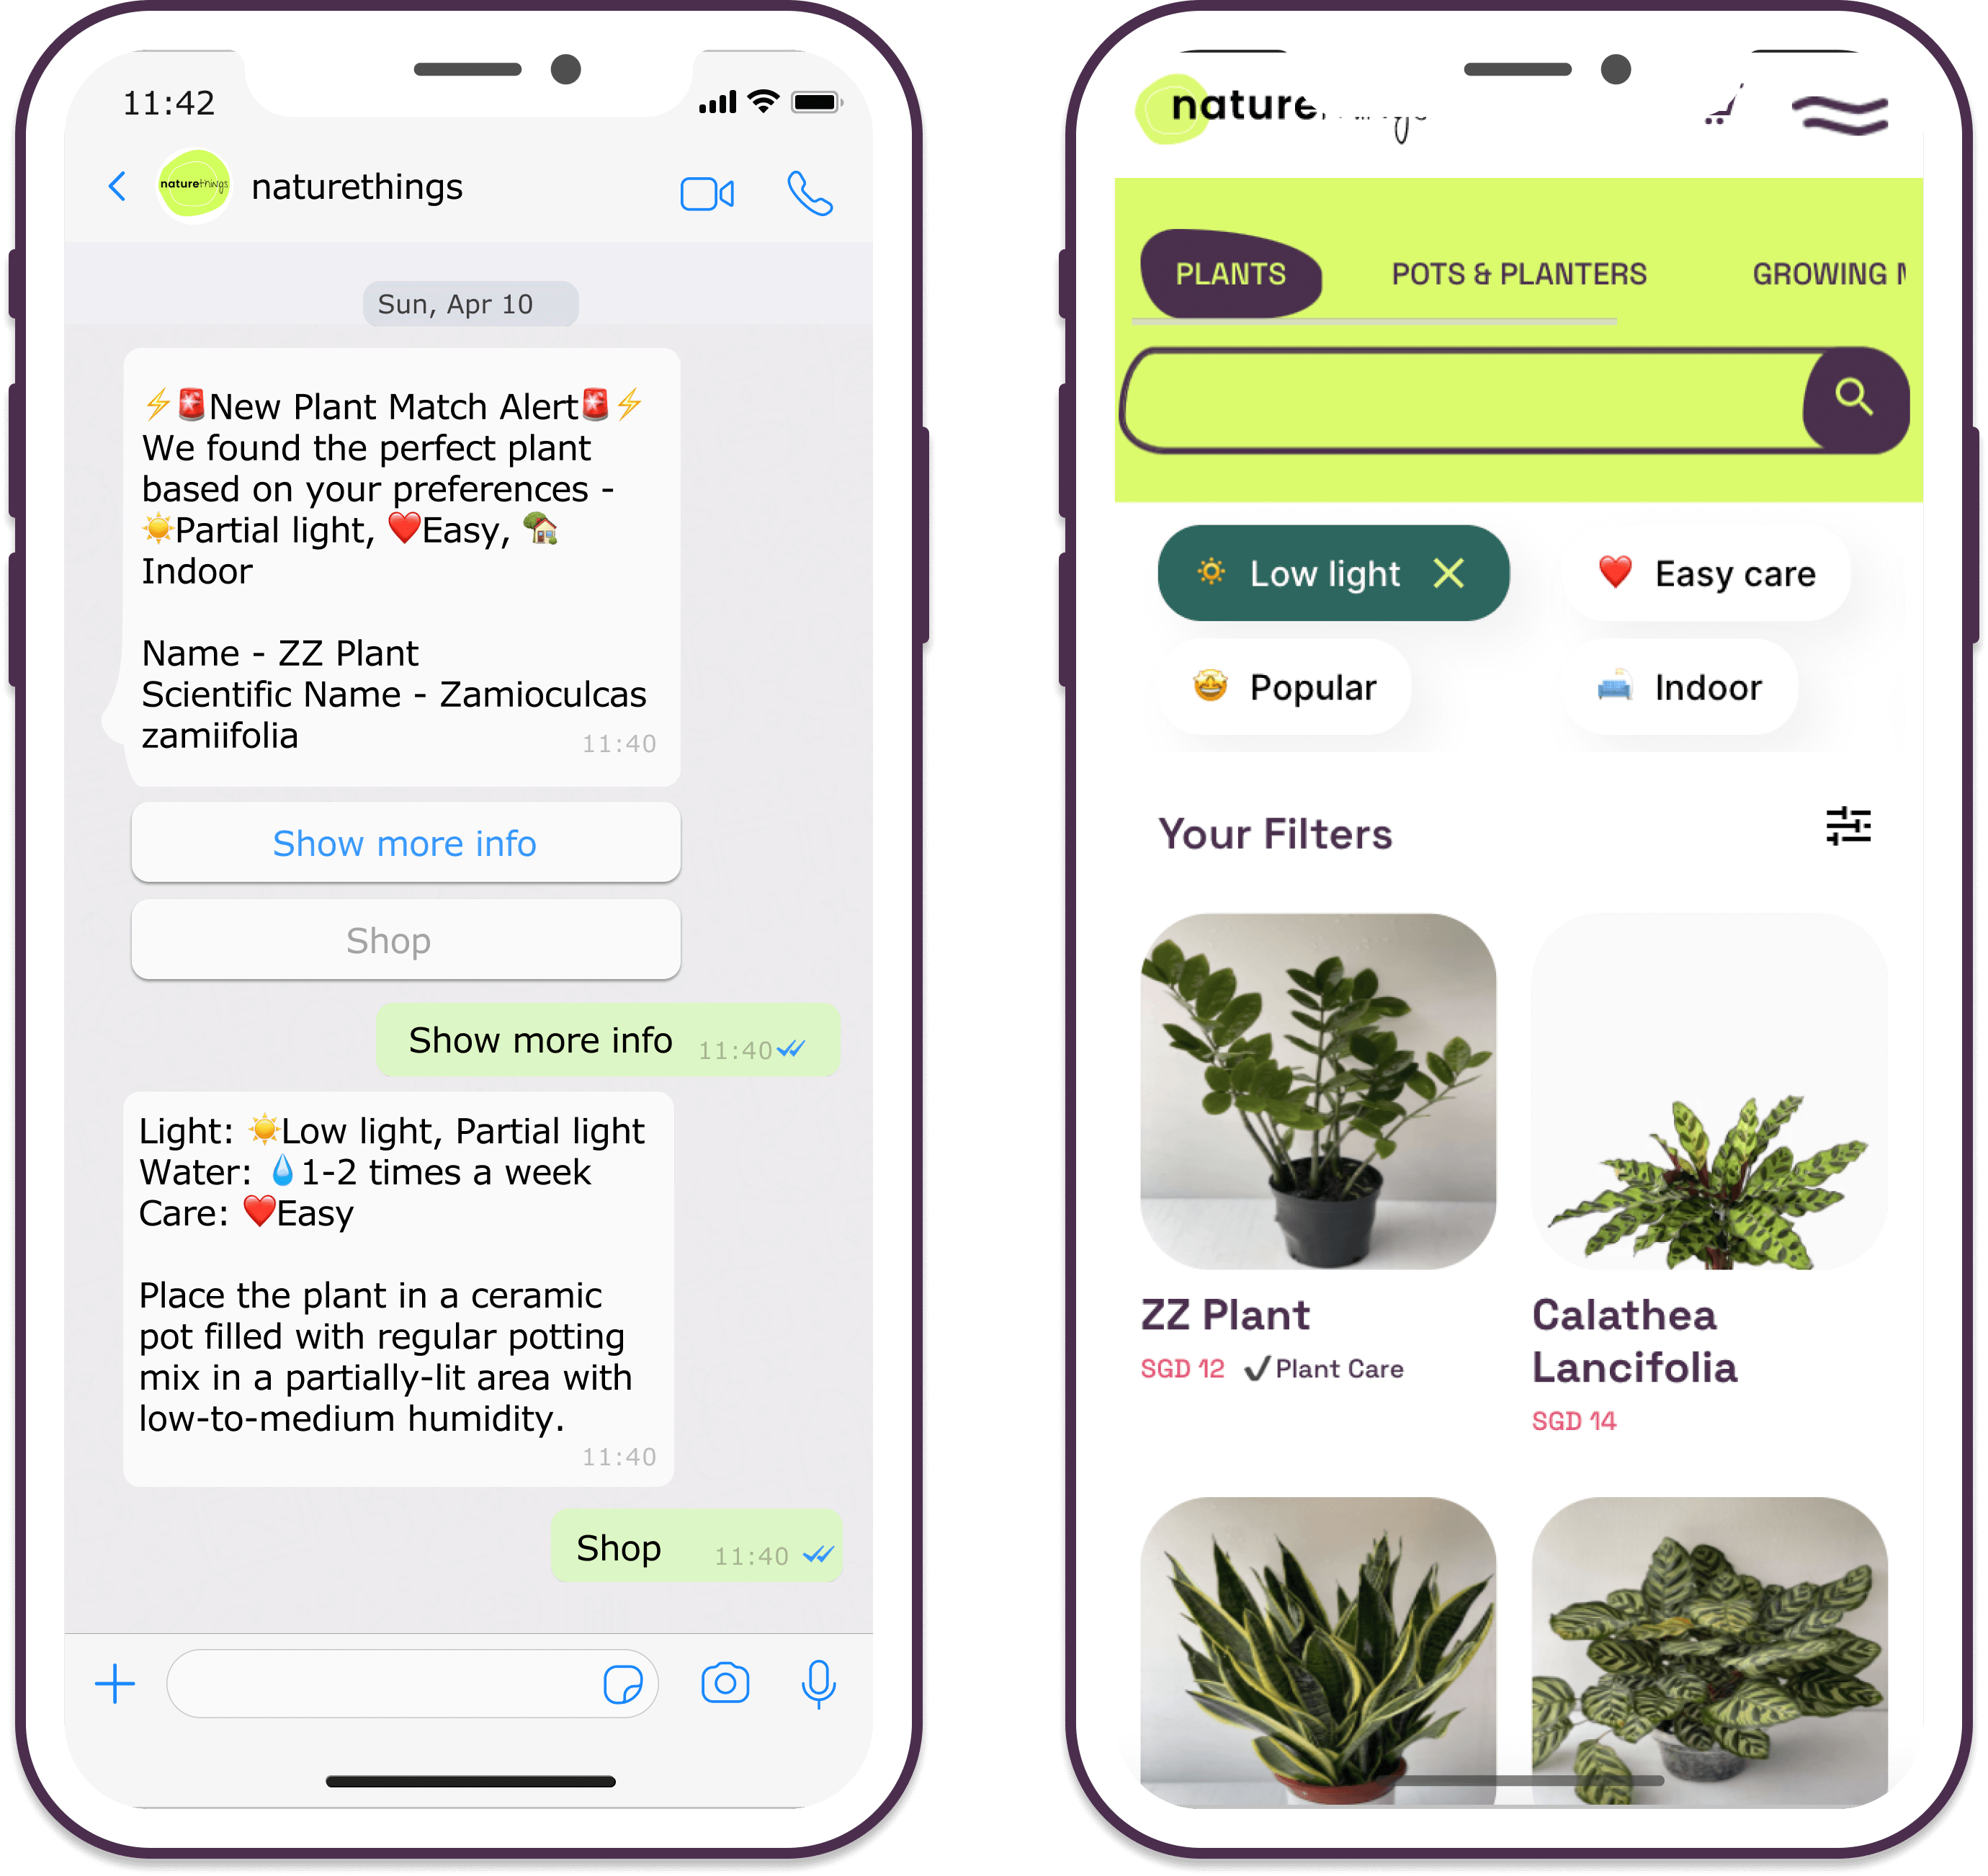 Our AI matches plants that suit your lifestyle and preferences. Find your plants, shop and grow them right.